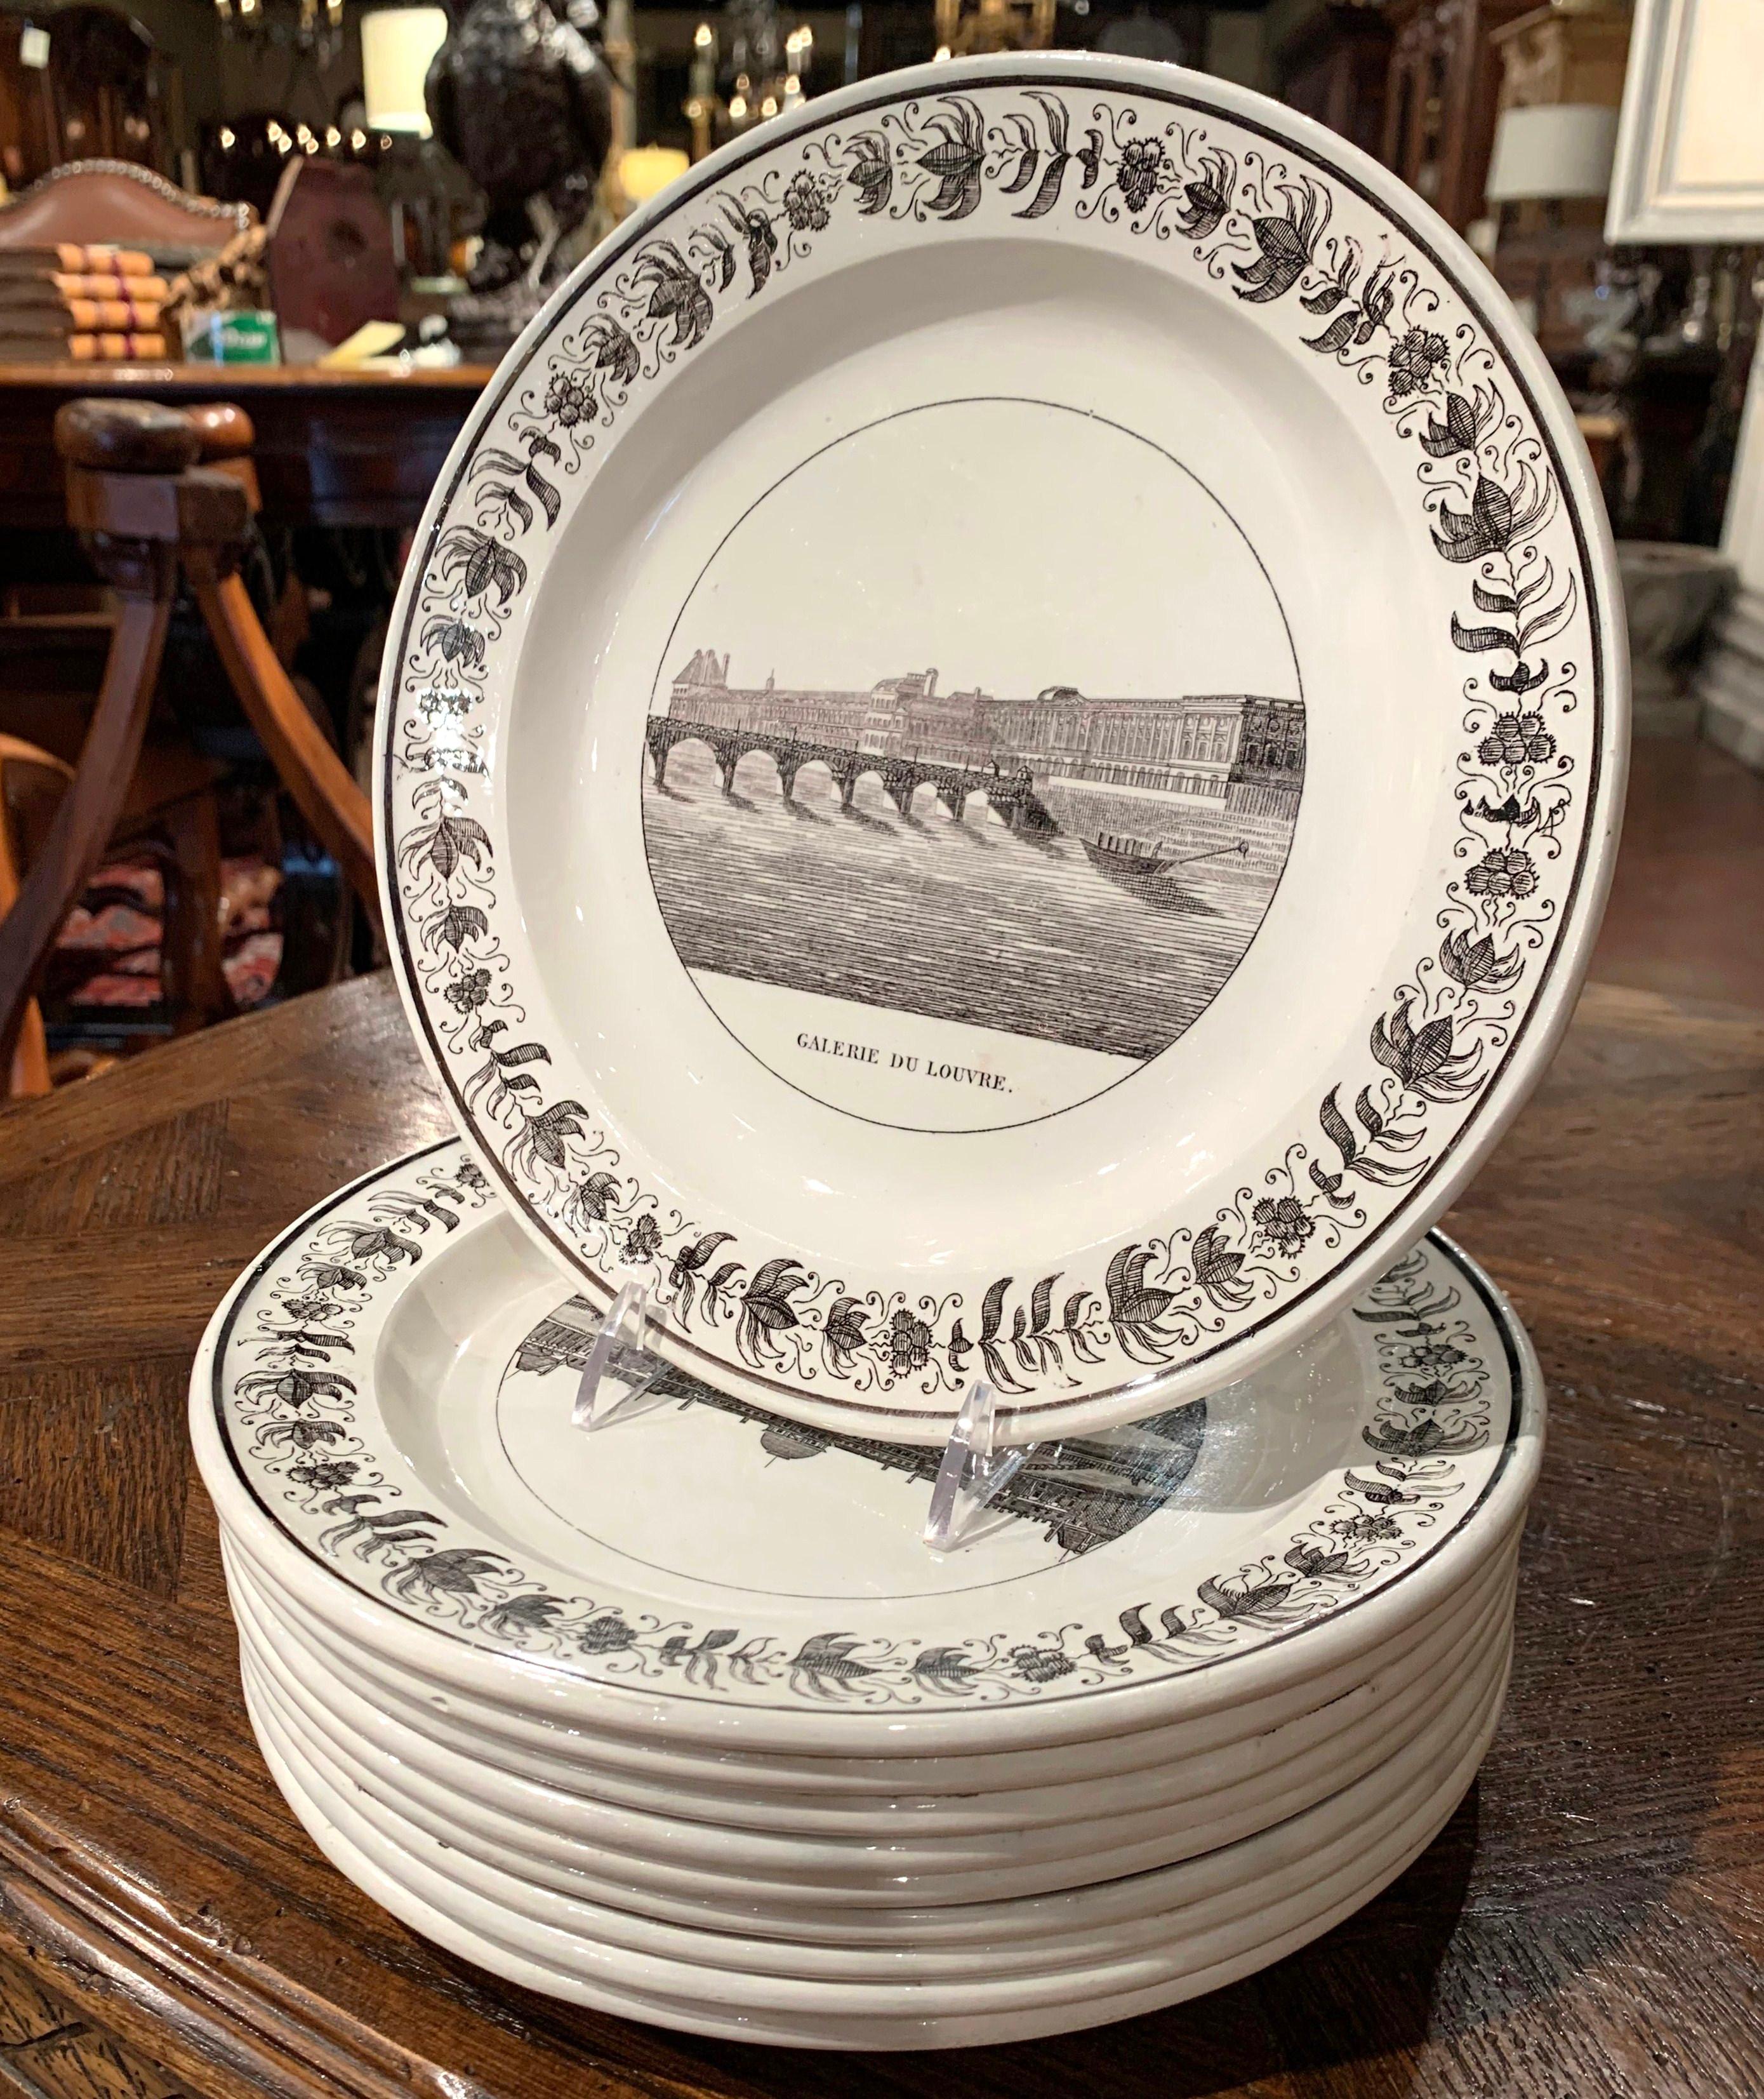 This elegant set of ten antique plates was crafted in Montereau, France, circa 1870. Each hand painted plate features an illustrated scene of Paris; the landscapes include silhouettes of famous Paris monuments such as 